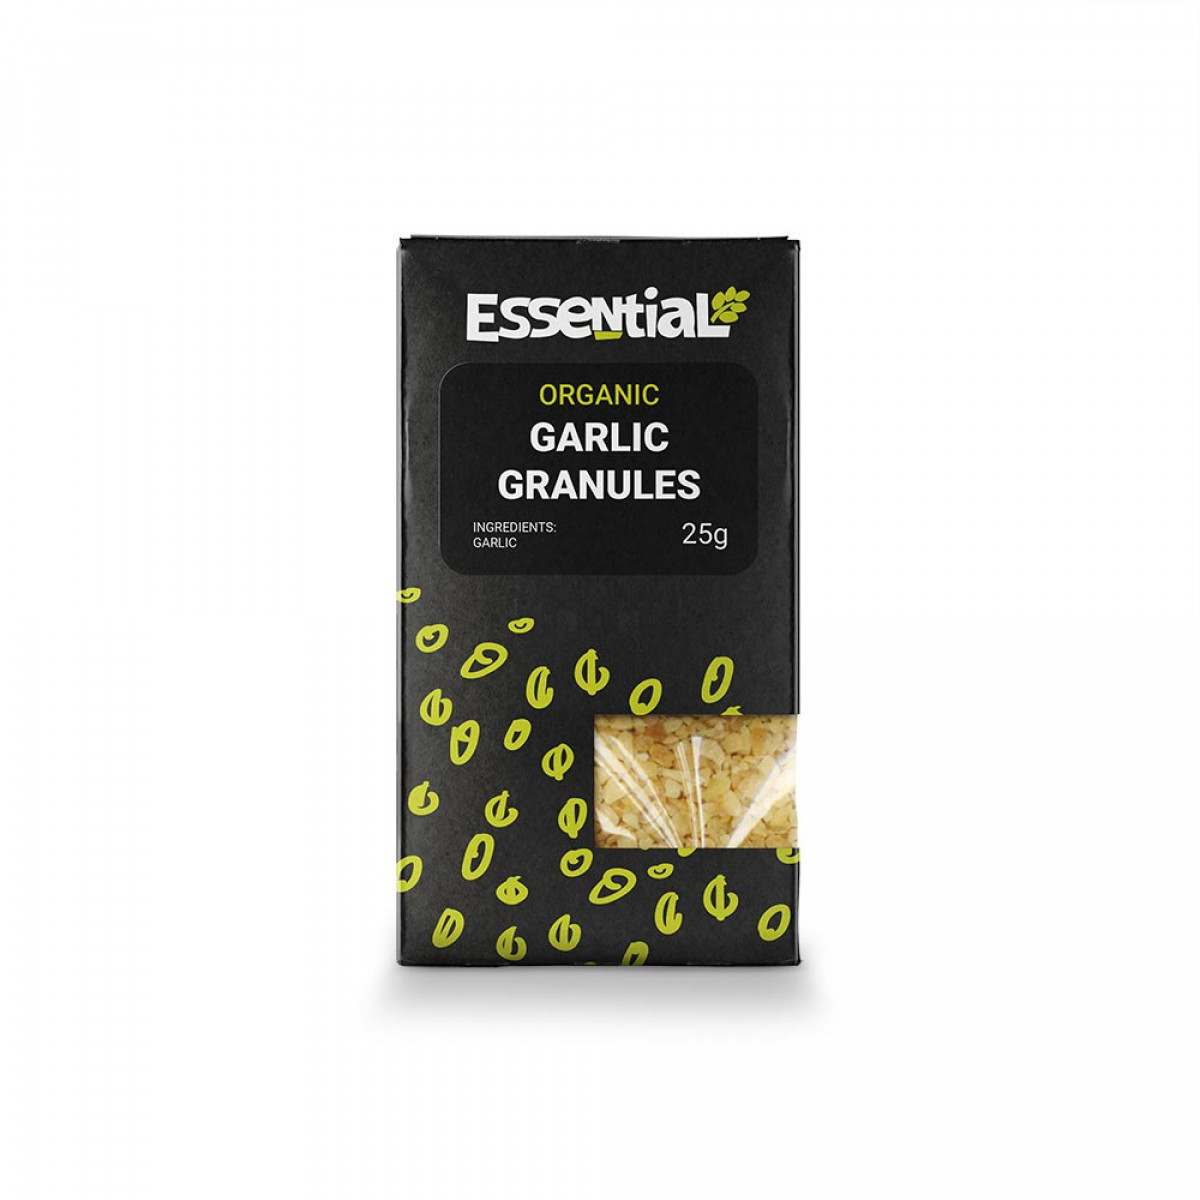 Product picture for Garlic Granules